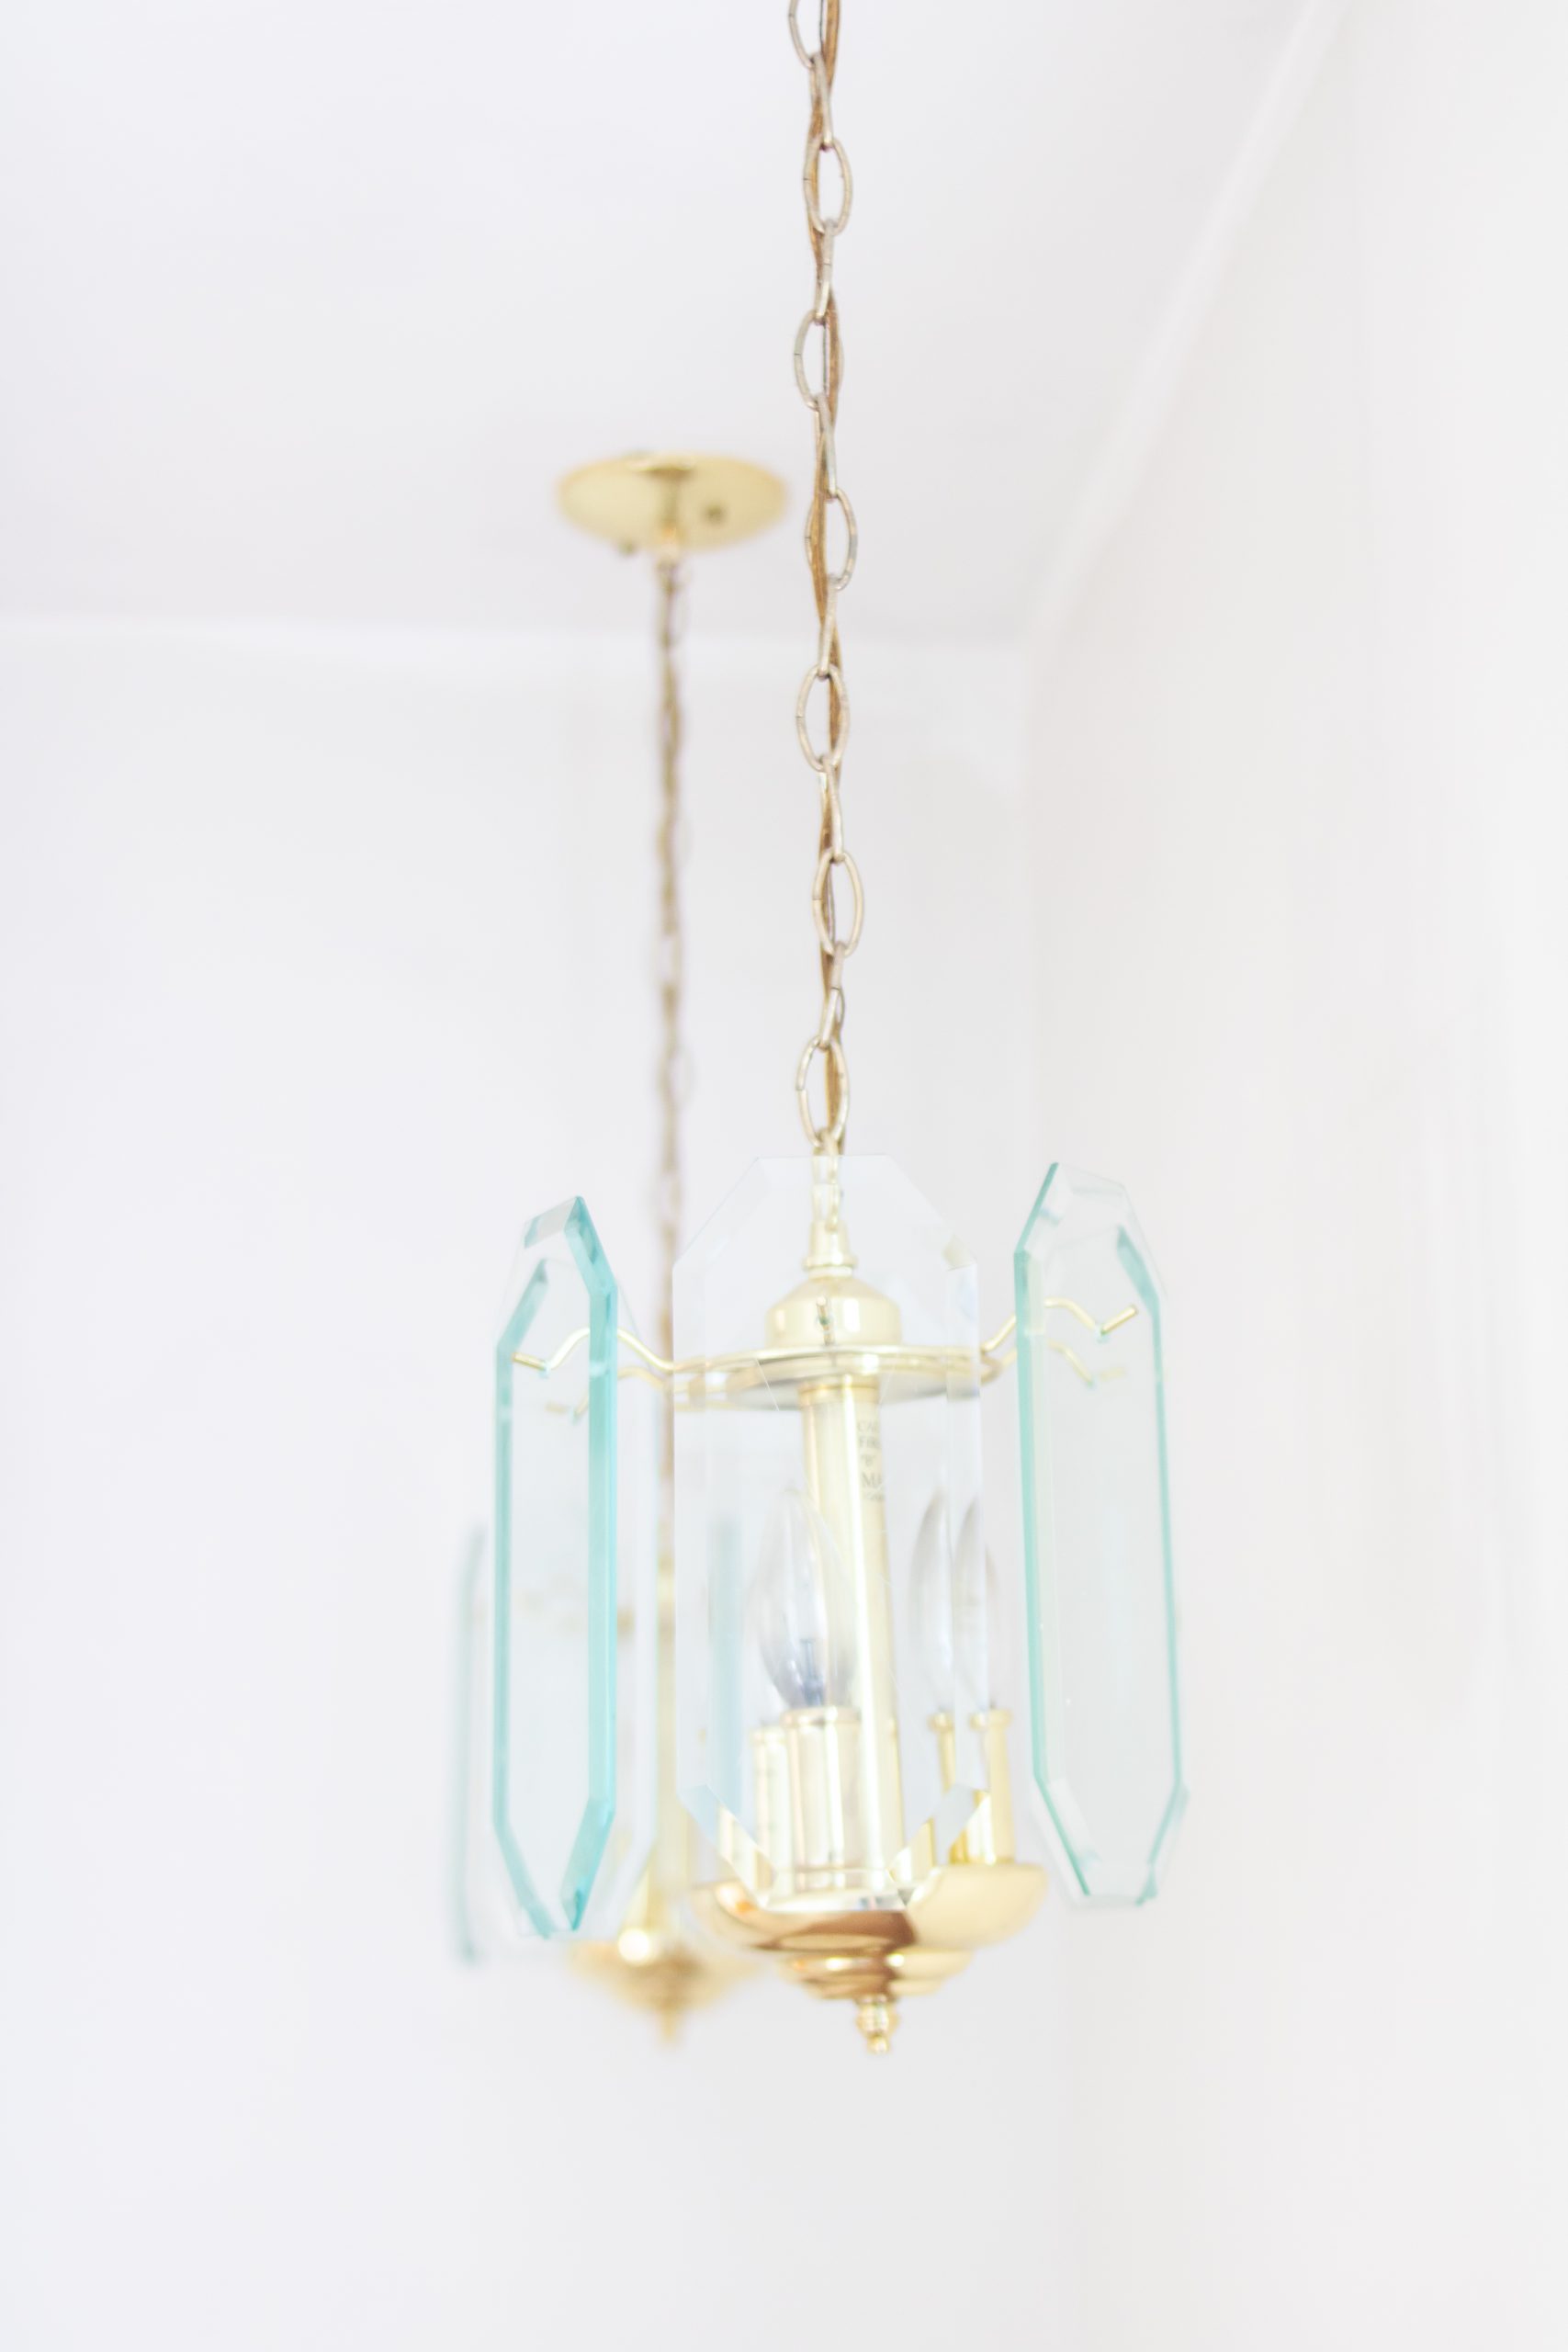 antique glass pendant lights with gold chain